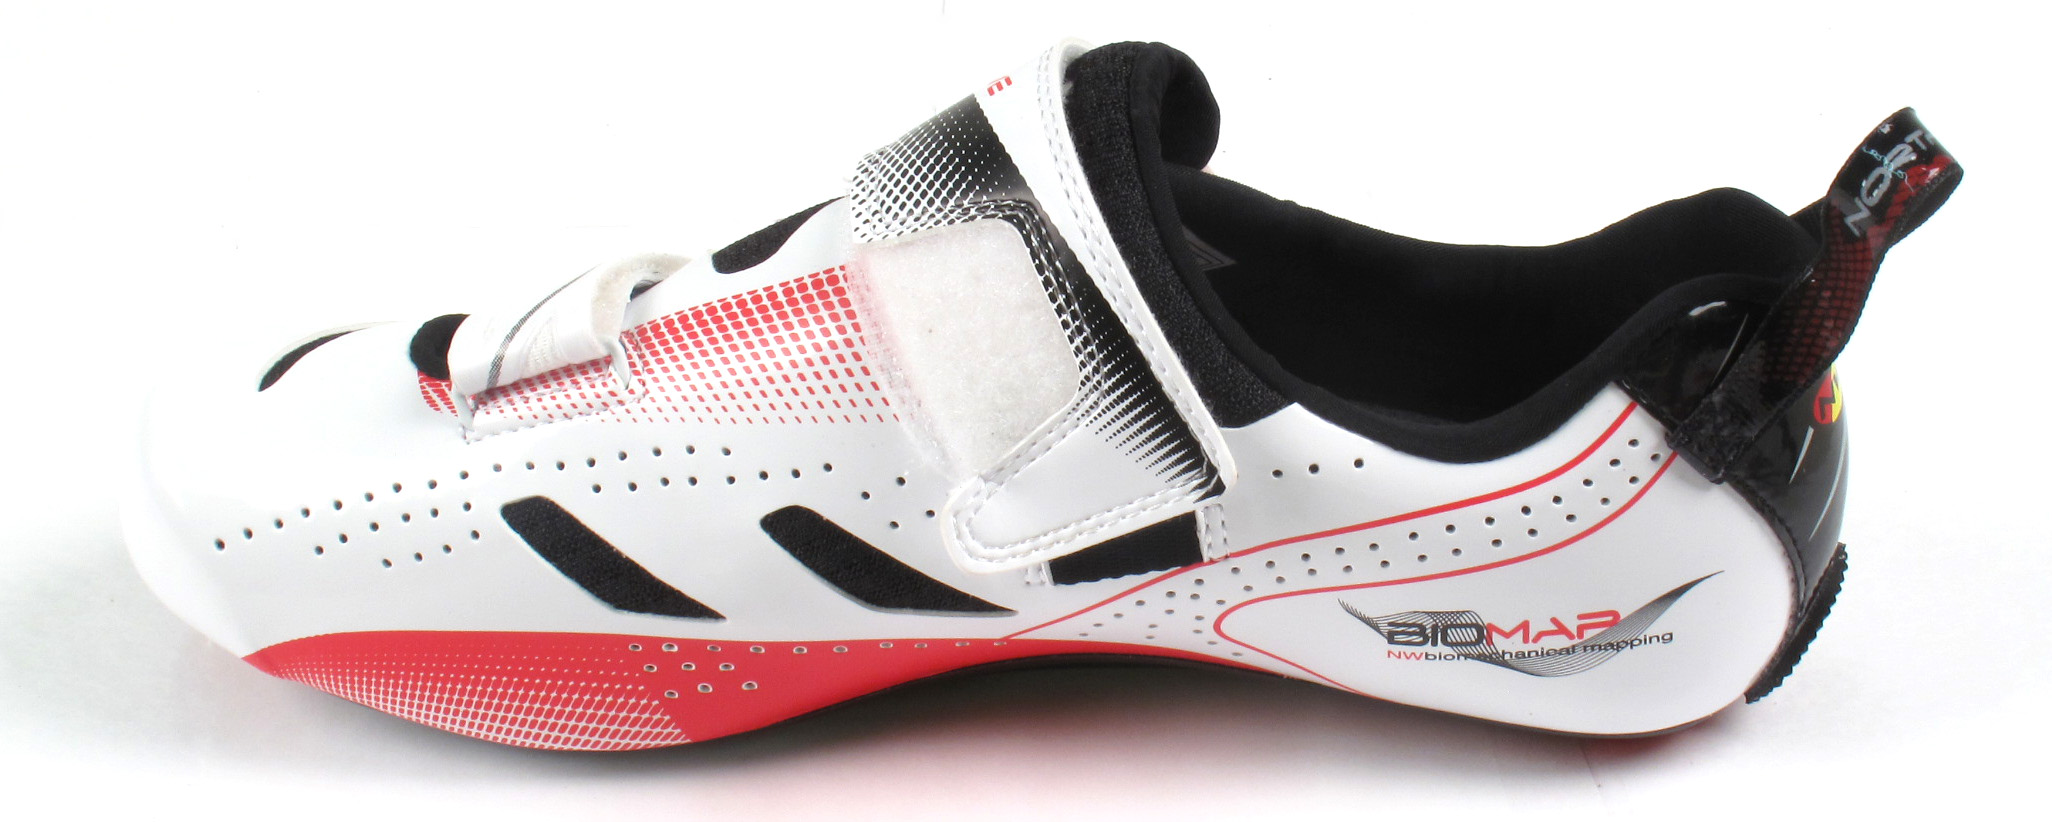 northwave tri shoes